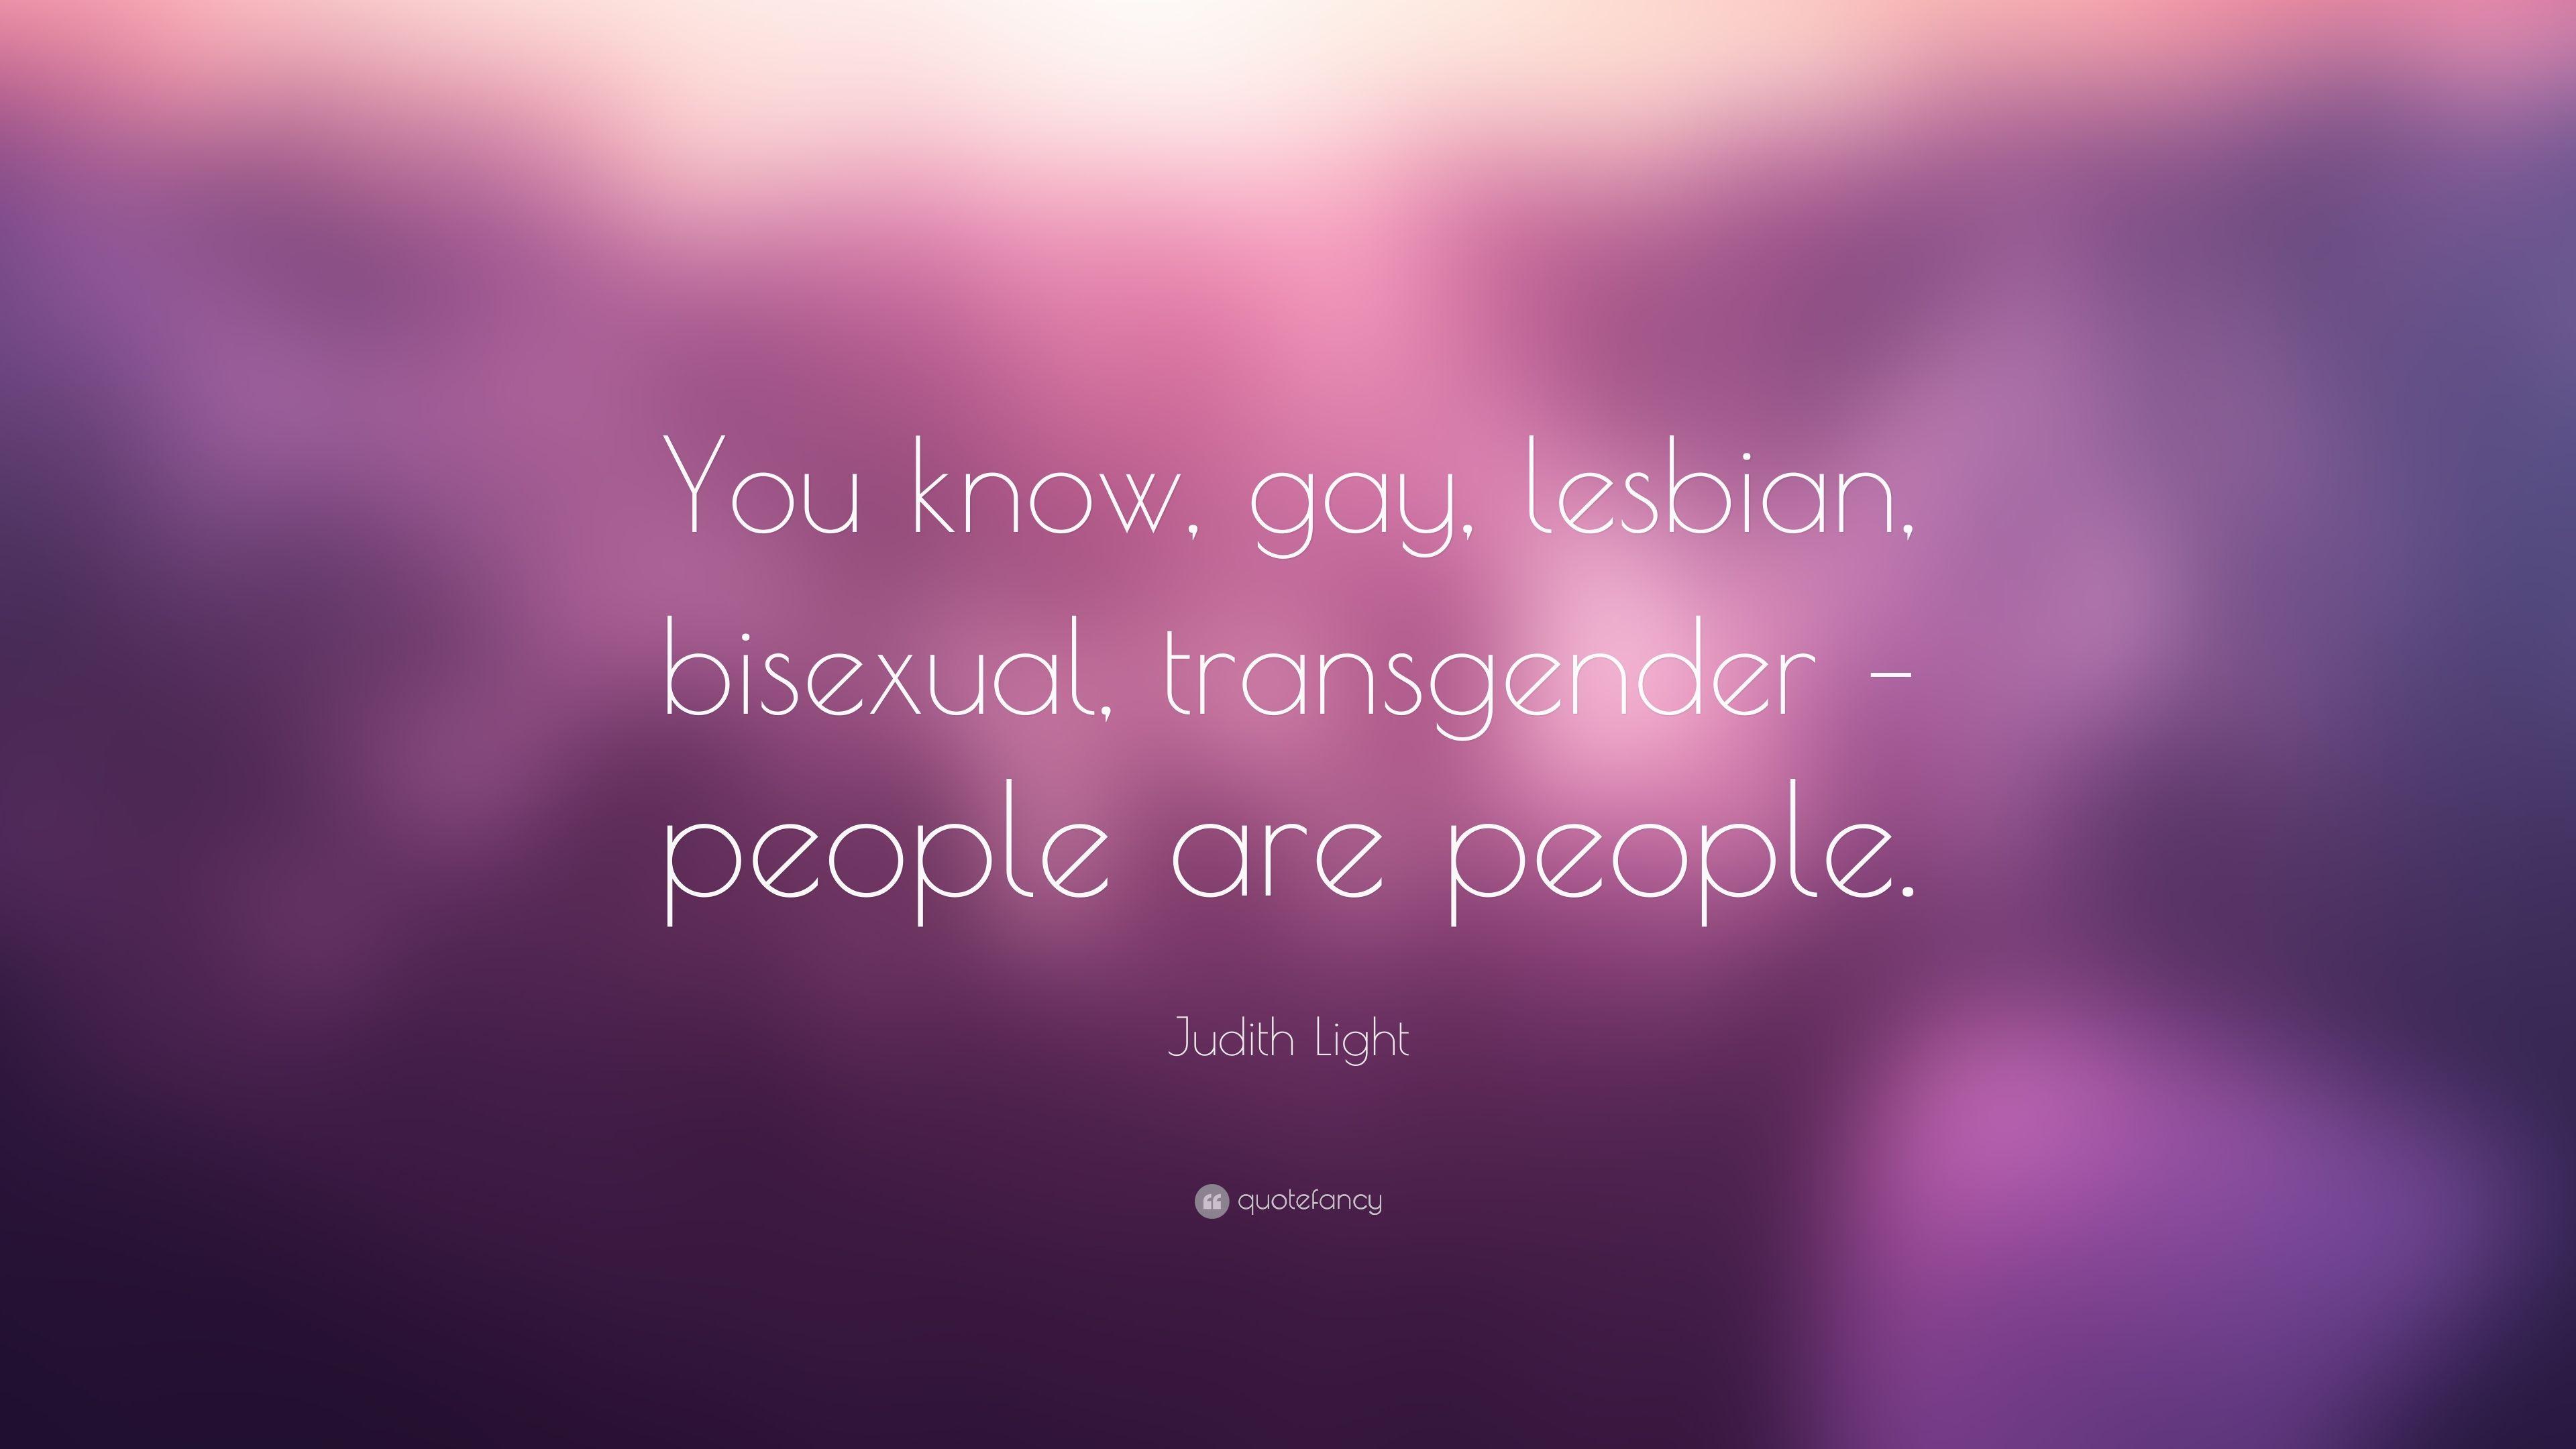 Judith Light Quote: “You know, gay, lesbian, bisexual, transgender